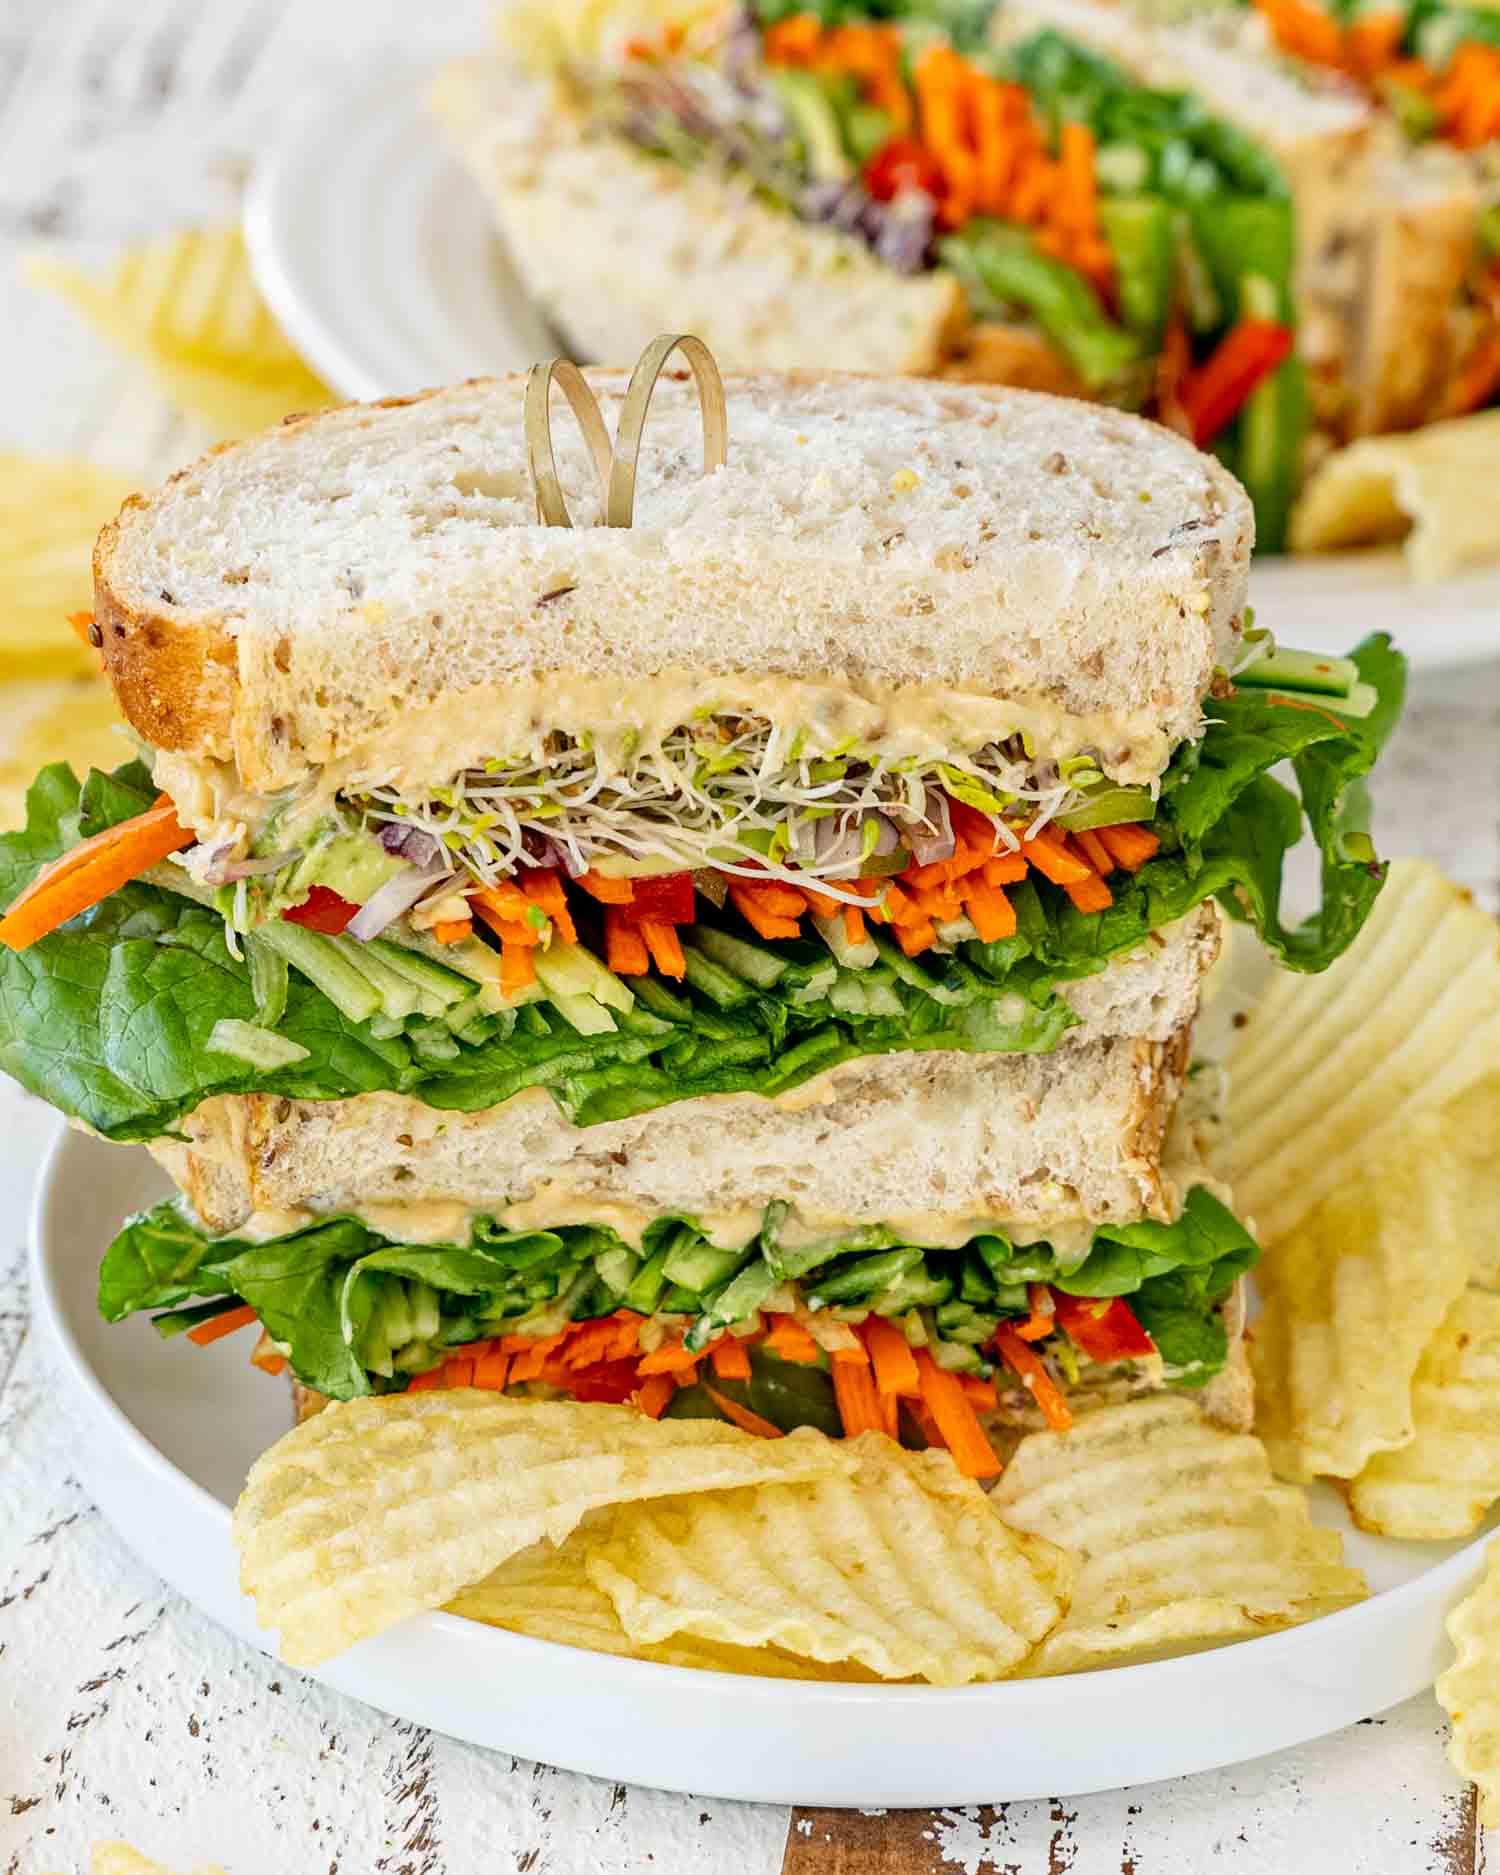 a stack of veggie and hummus sandwich on a plate along some potato chips.